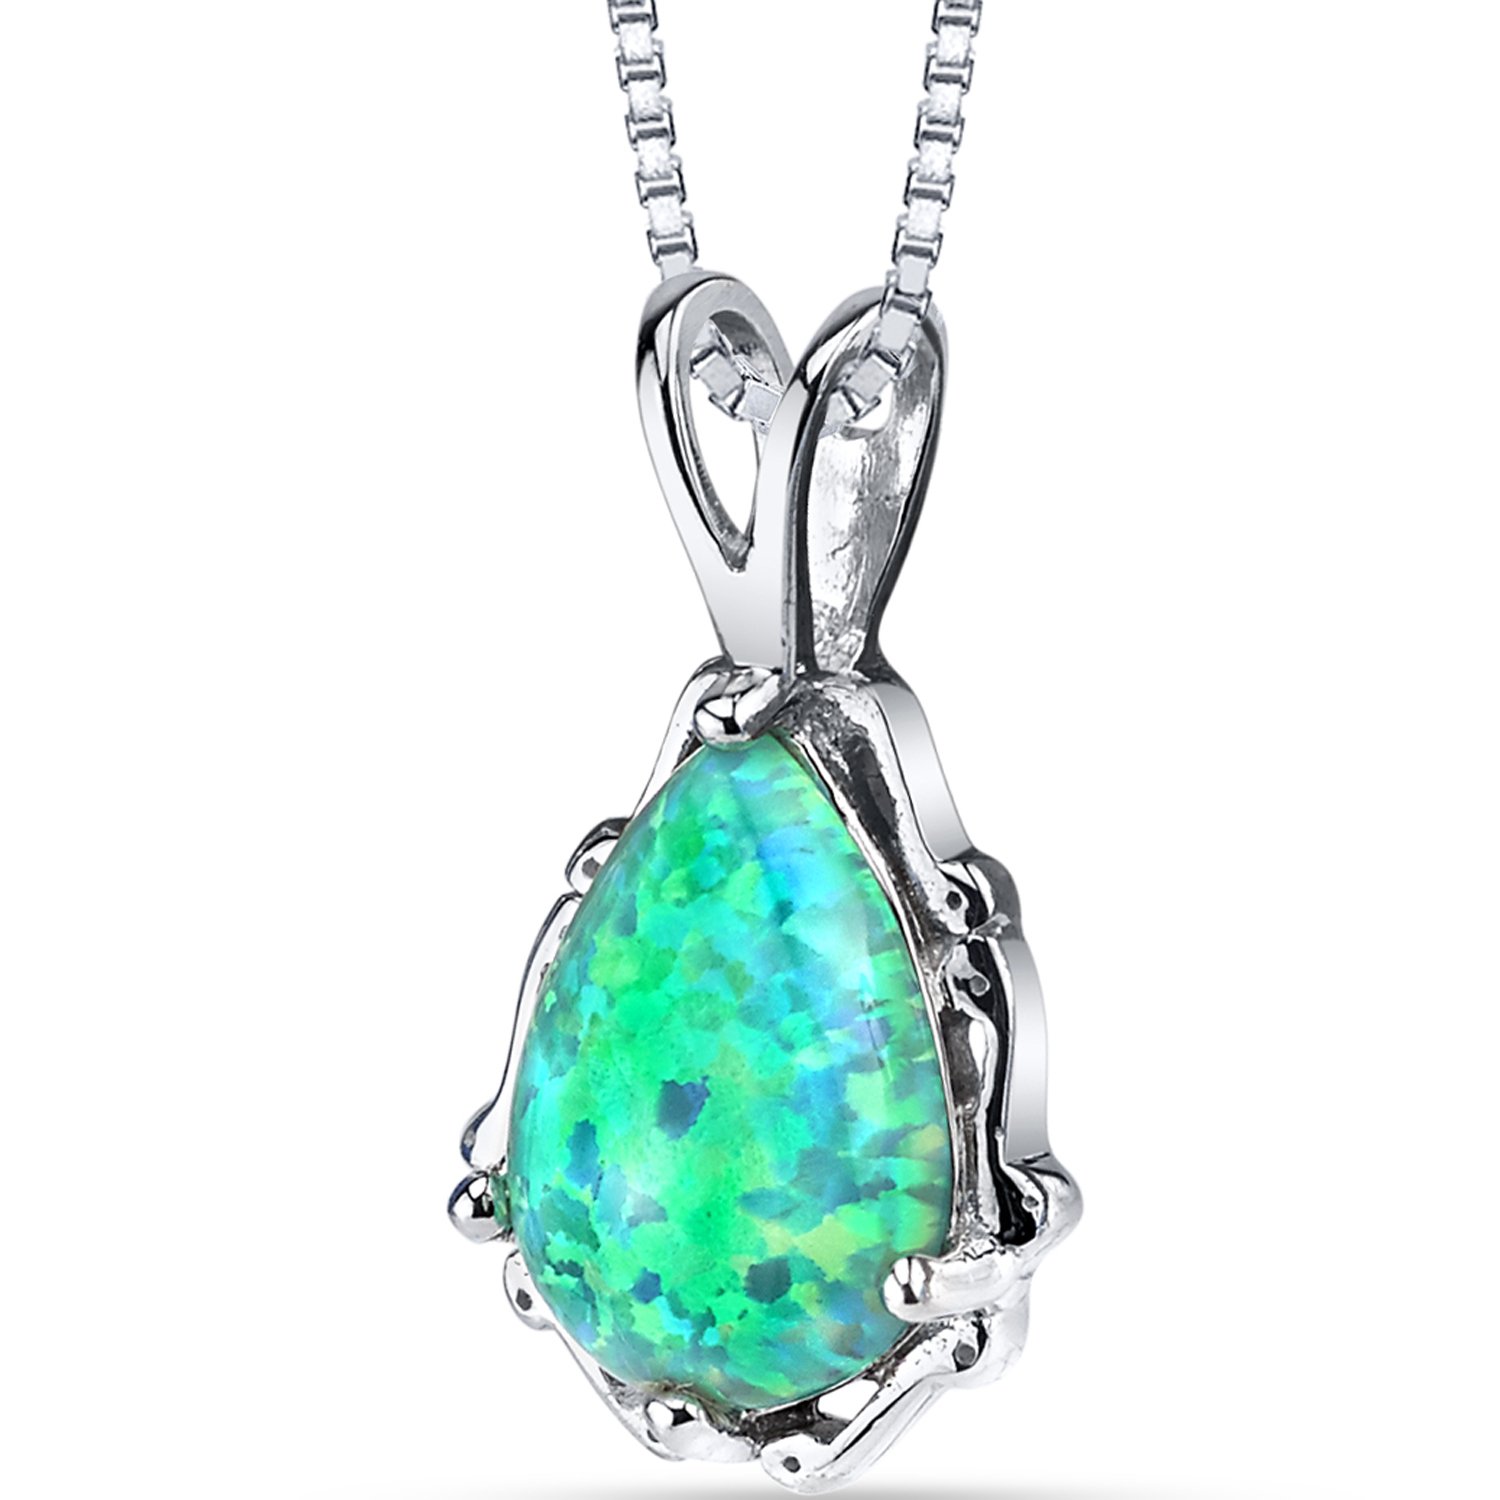 Peora Created Powder Green Opal Vintage Teardrop Solitaire Pendant Necklace for Women 925 Sterling Silver, 1 Carat Pear Shape 10x7mm with 18 inch Chain